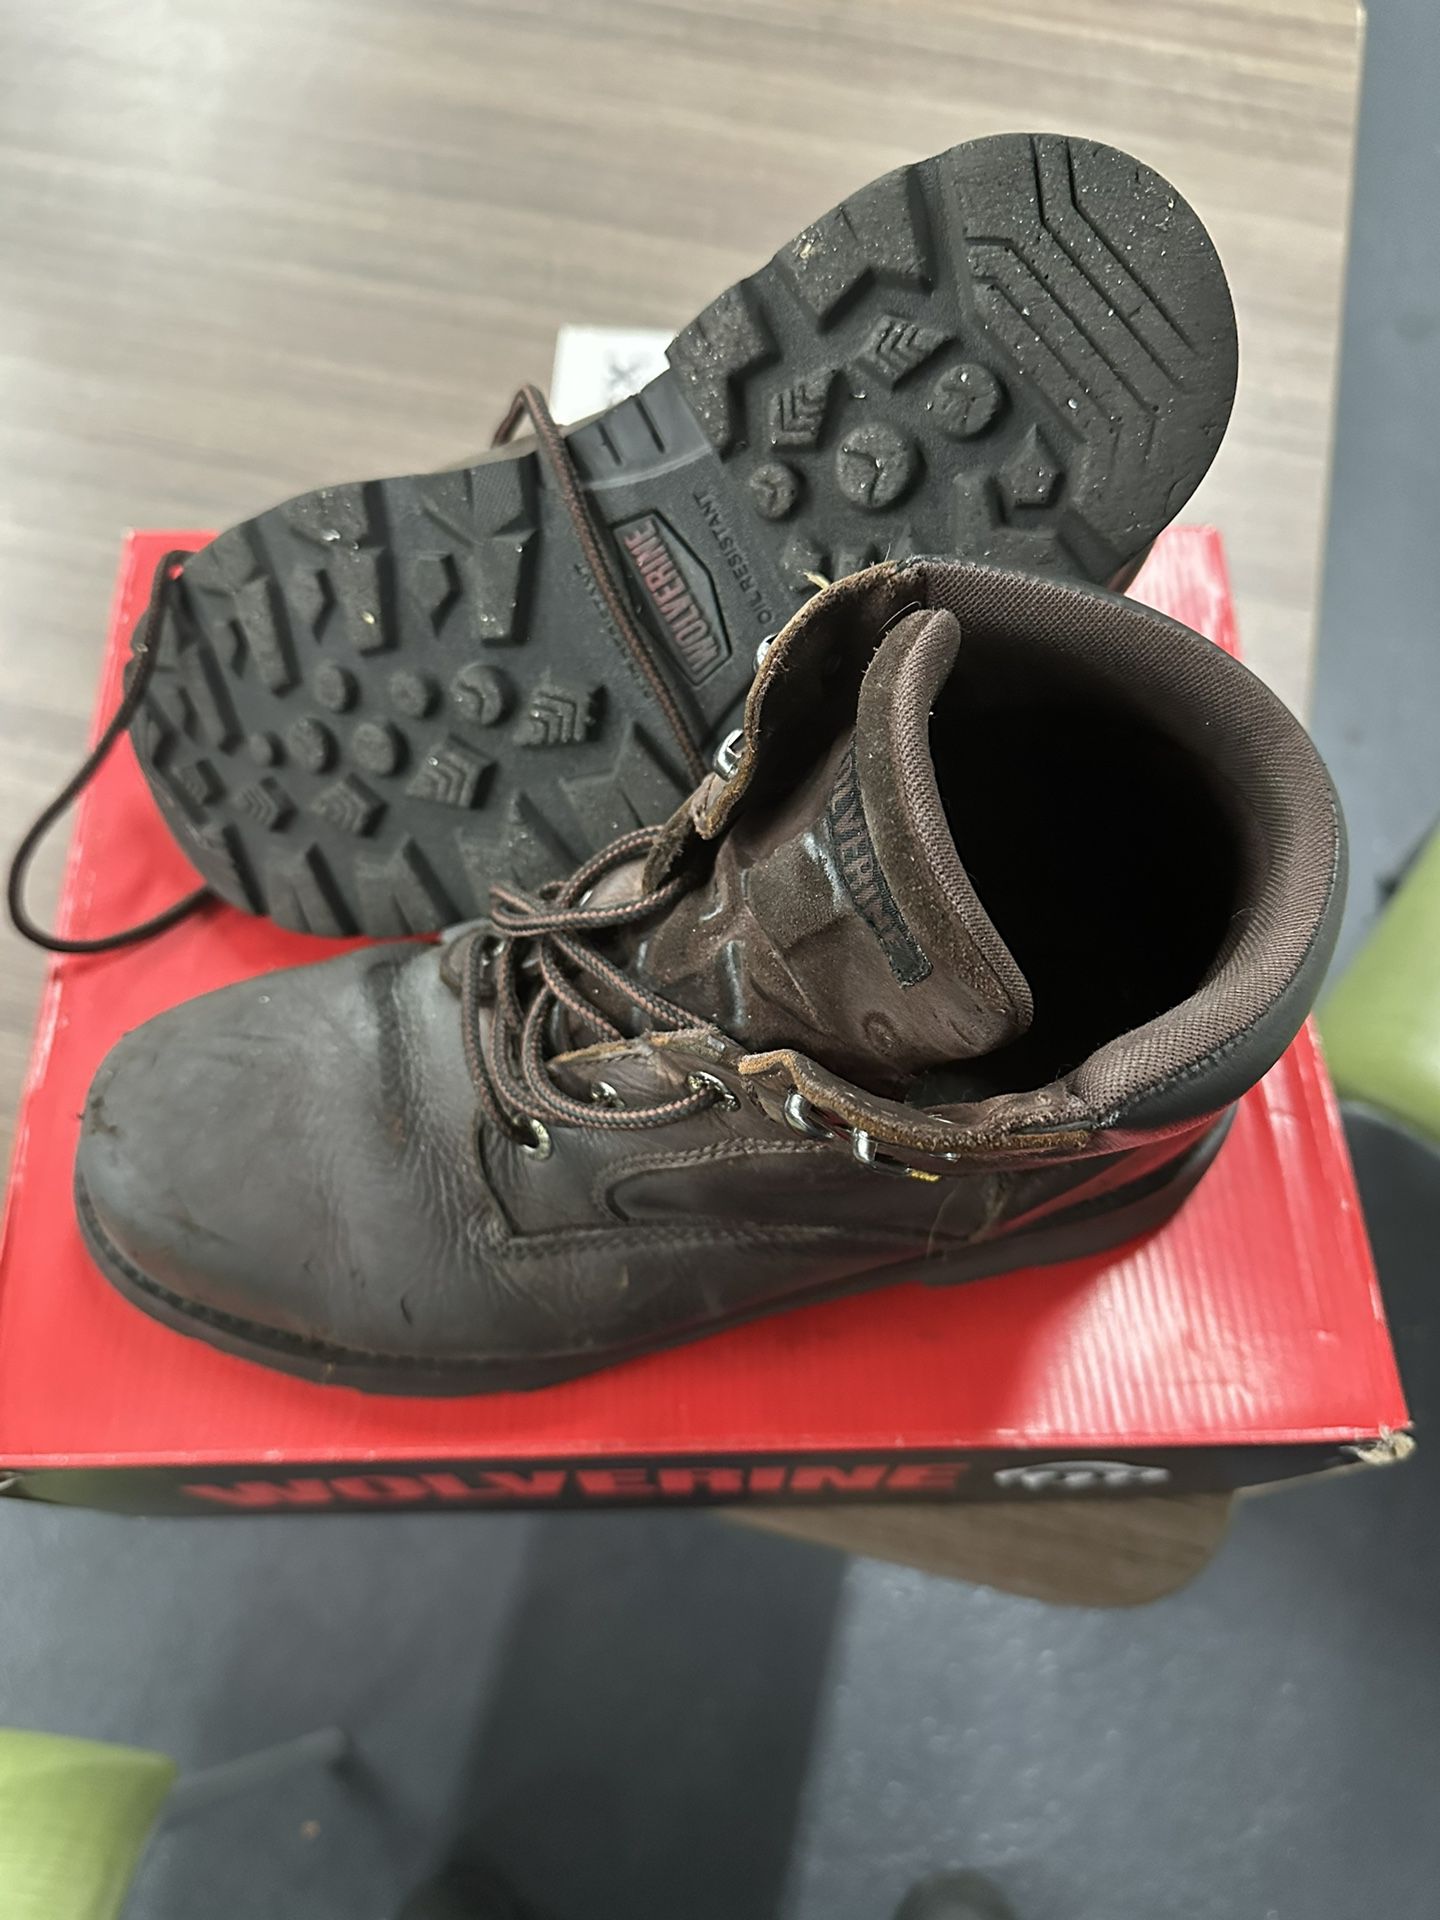 Used Work Boots 